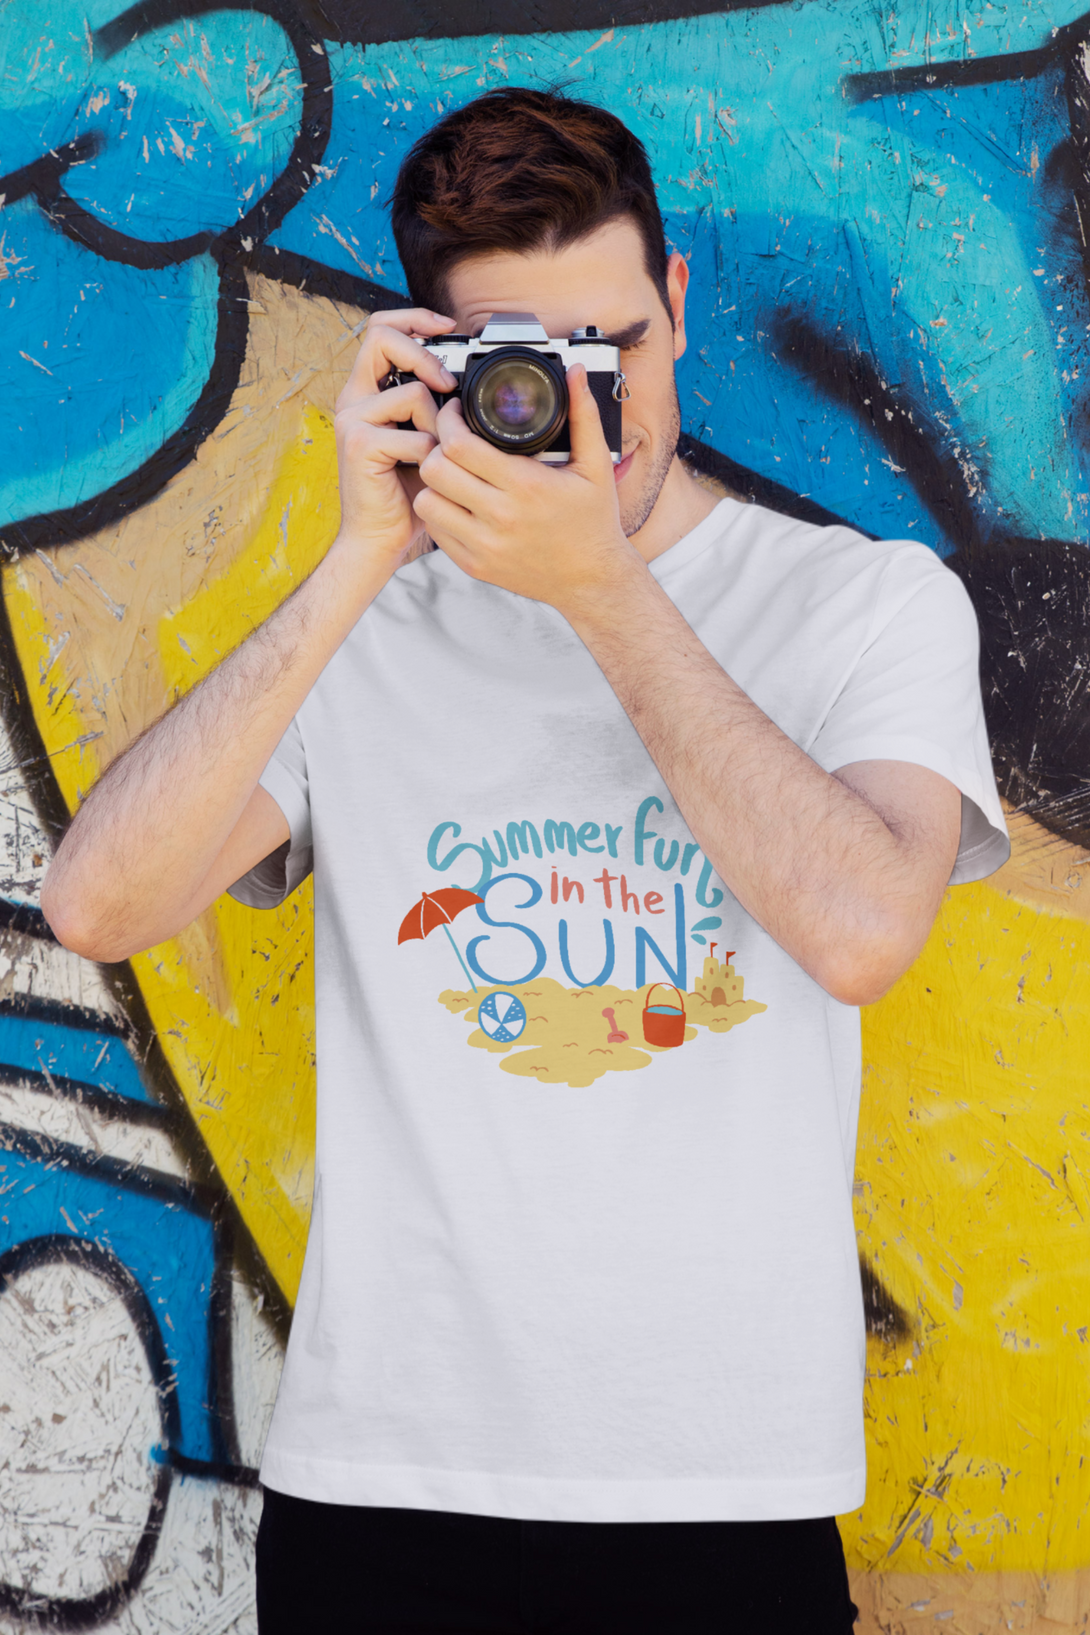 Summer Fun In The Sun White Printed T-Shirt For Men - WowWaves - 7